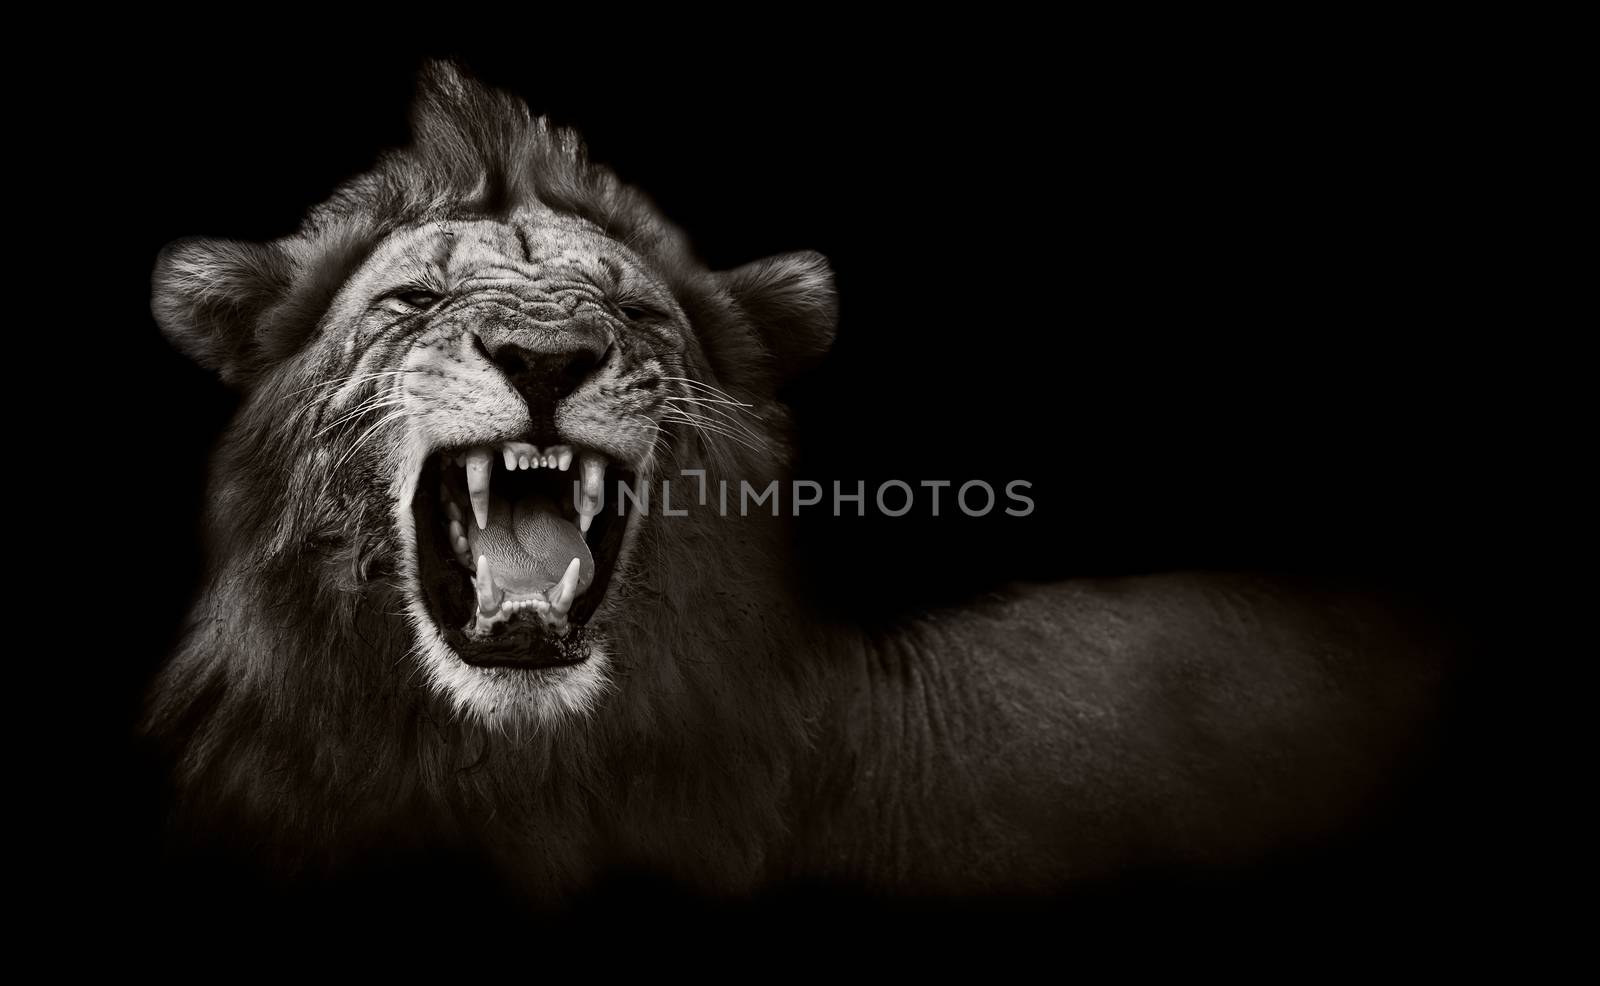 Wild African Male Lion Growling and Showing Dangerous Teeth